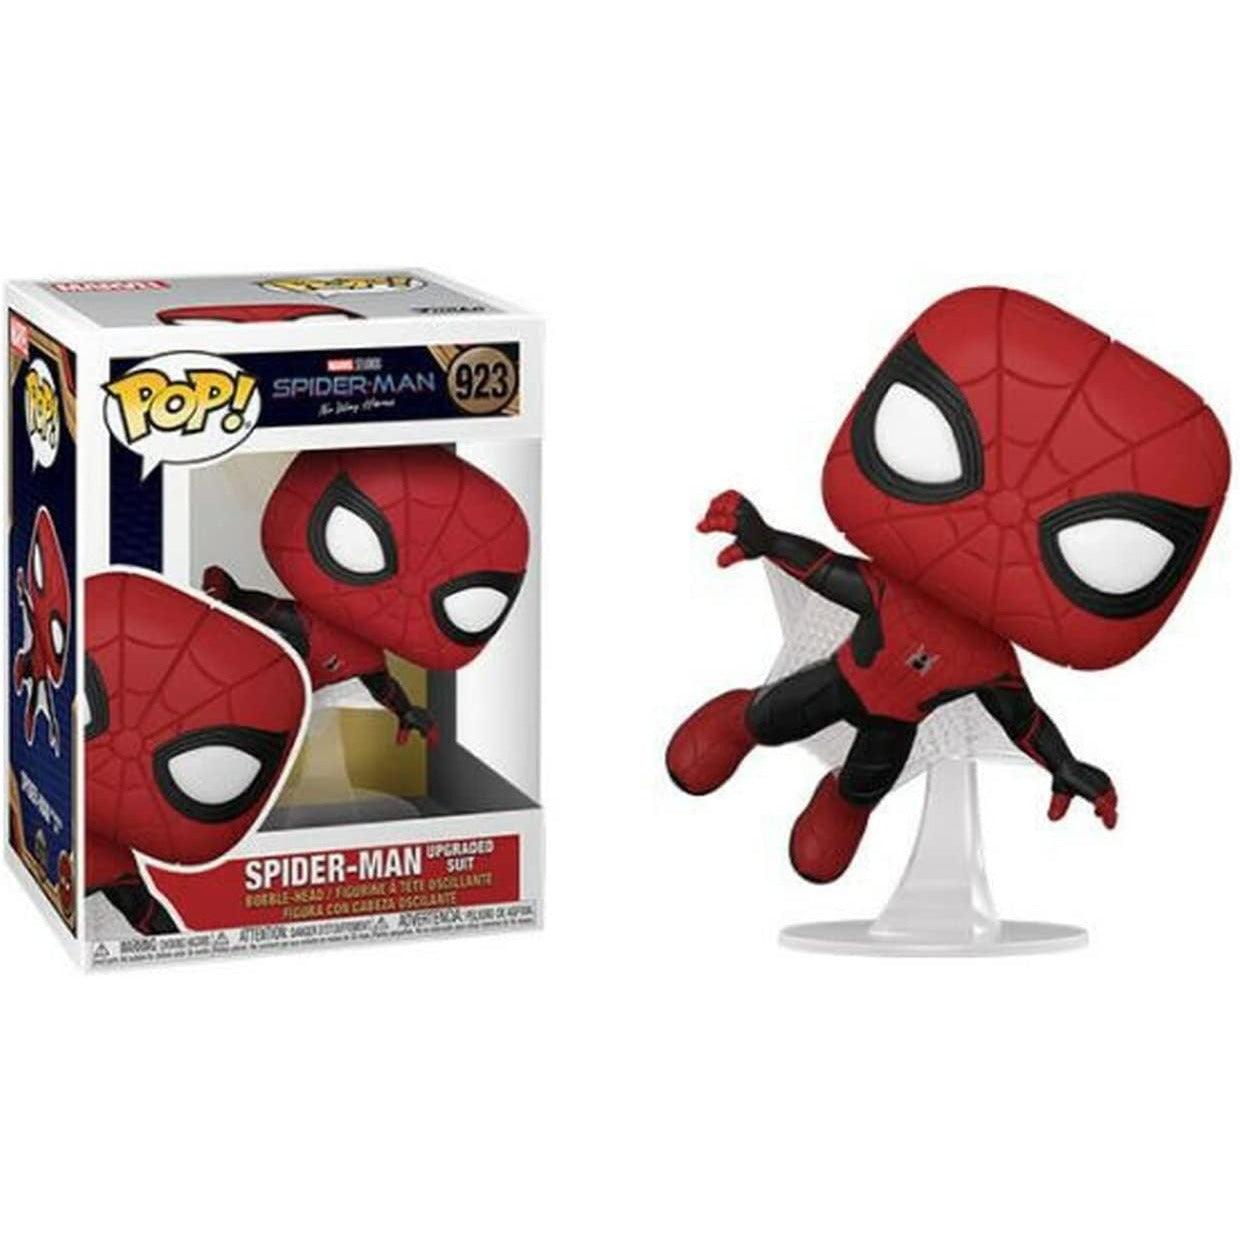 Funko Spider-Man Upgraded Suit - Spider-Man No Way Home - BumbleToys - 18+, Action Figures, Avengers, Boys, Characters, Funko, Pre-Order, Spider man, Spider-Man No Way Home, Spiderman